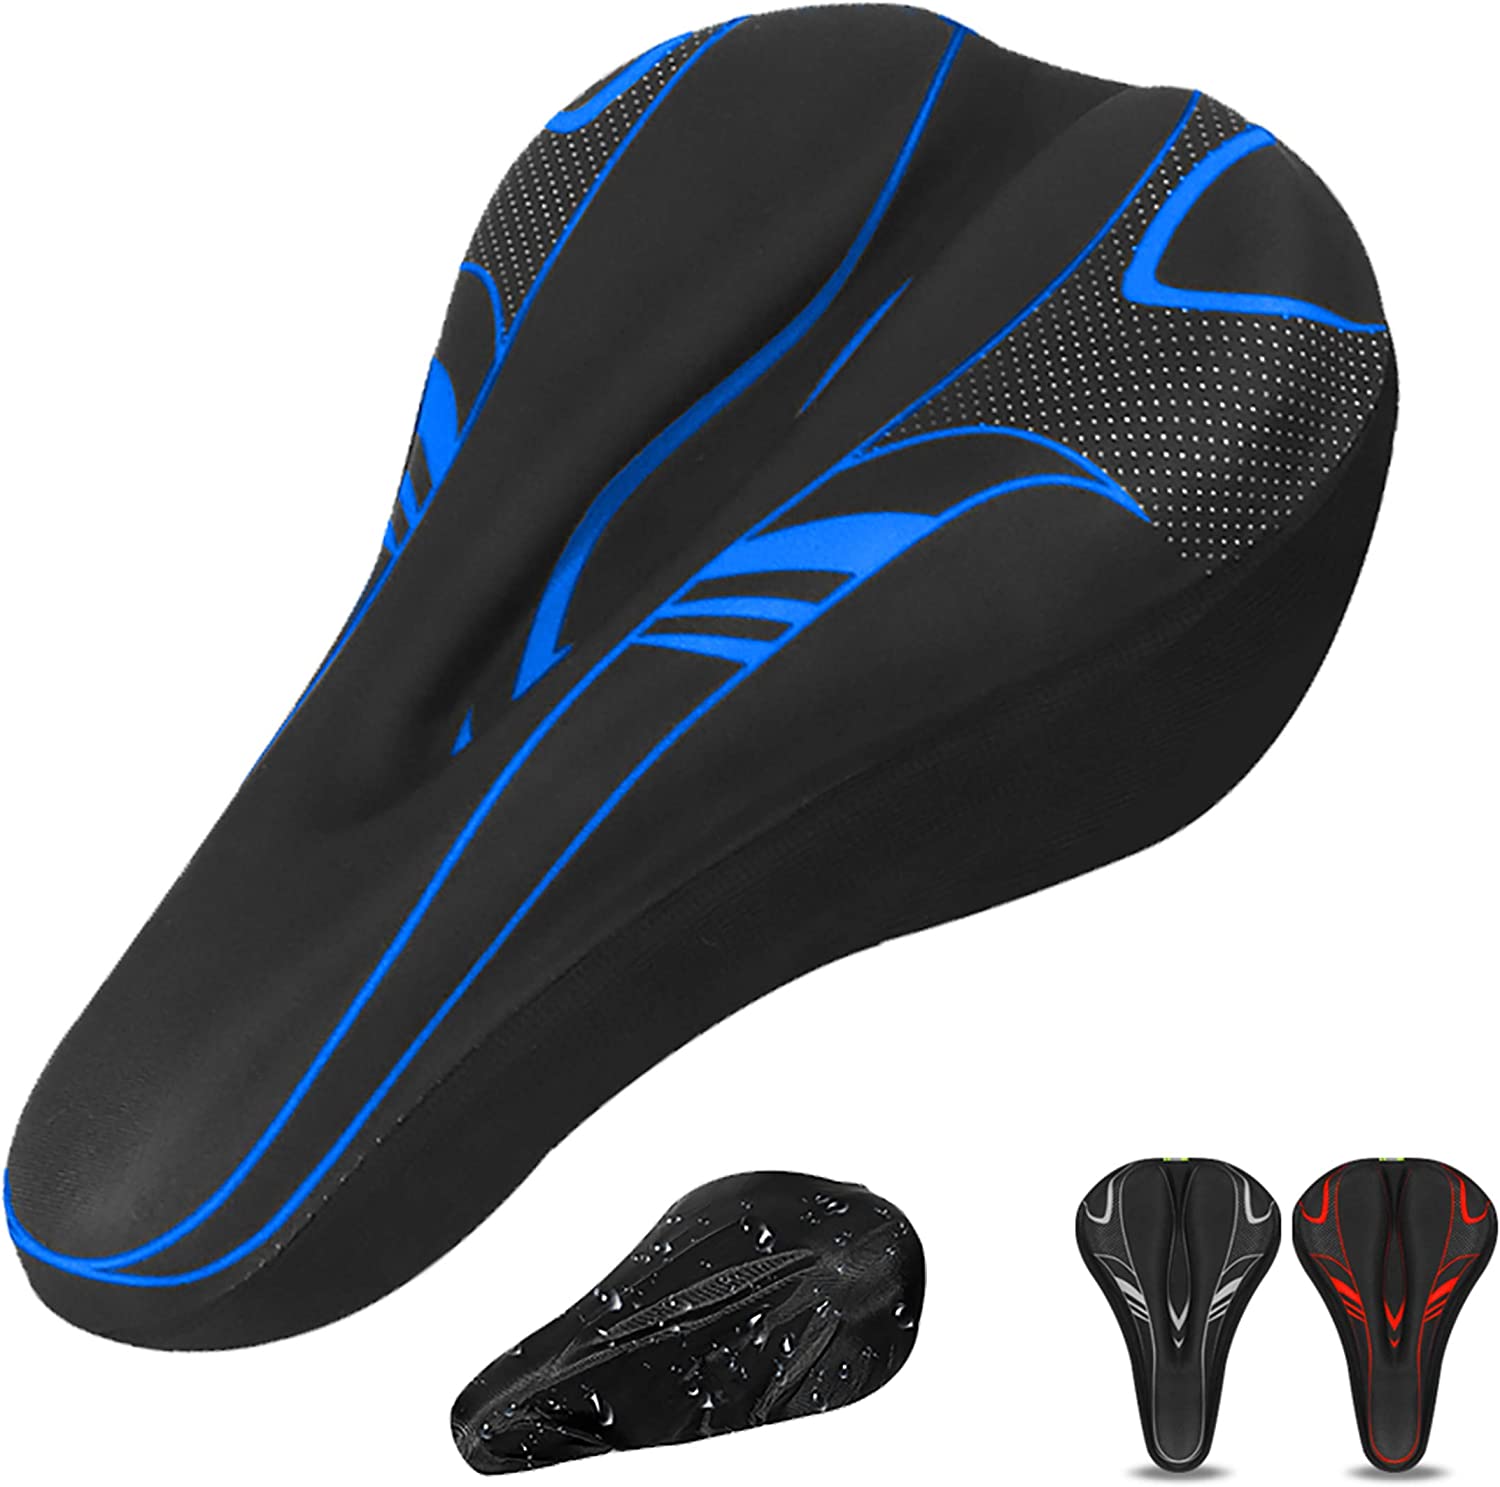 A bike seat cushion will provide relief when riding on a mountain bike seat that is too hard.